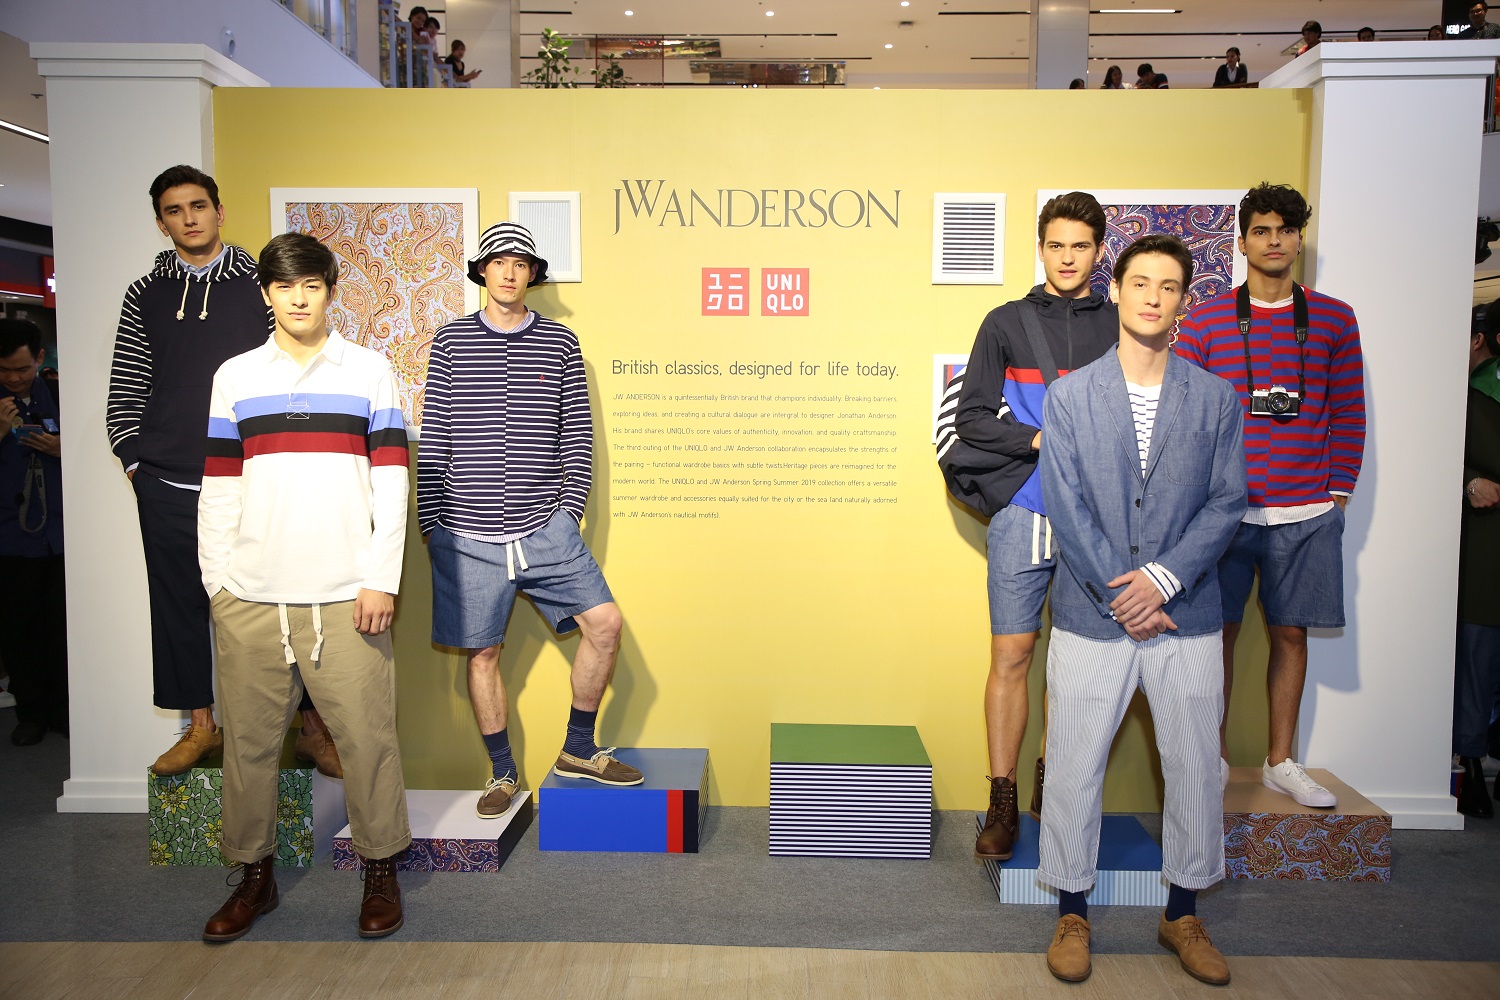 UNIQLO and JW ANDERSON Spring/Summer 2019